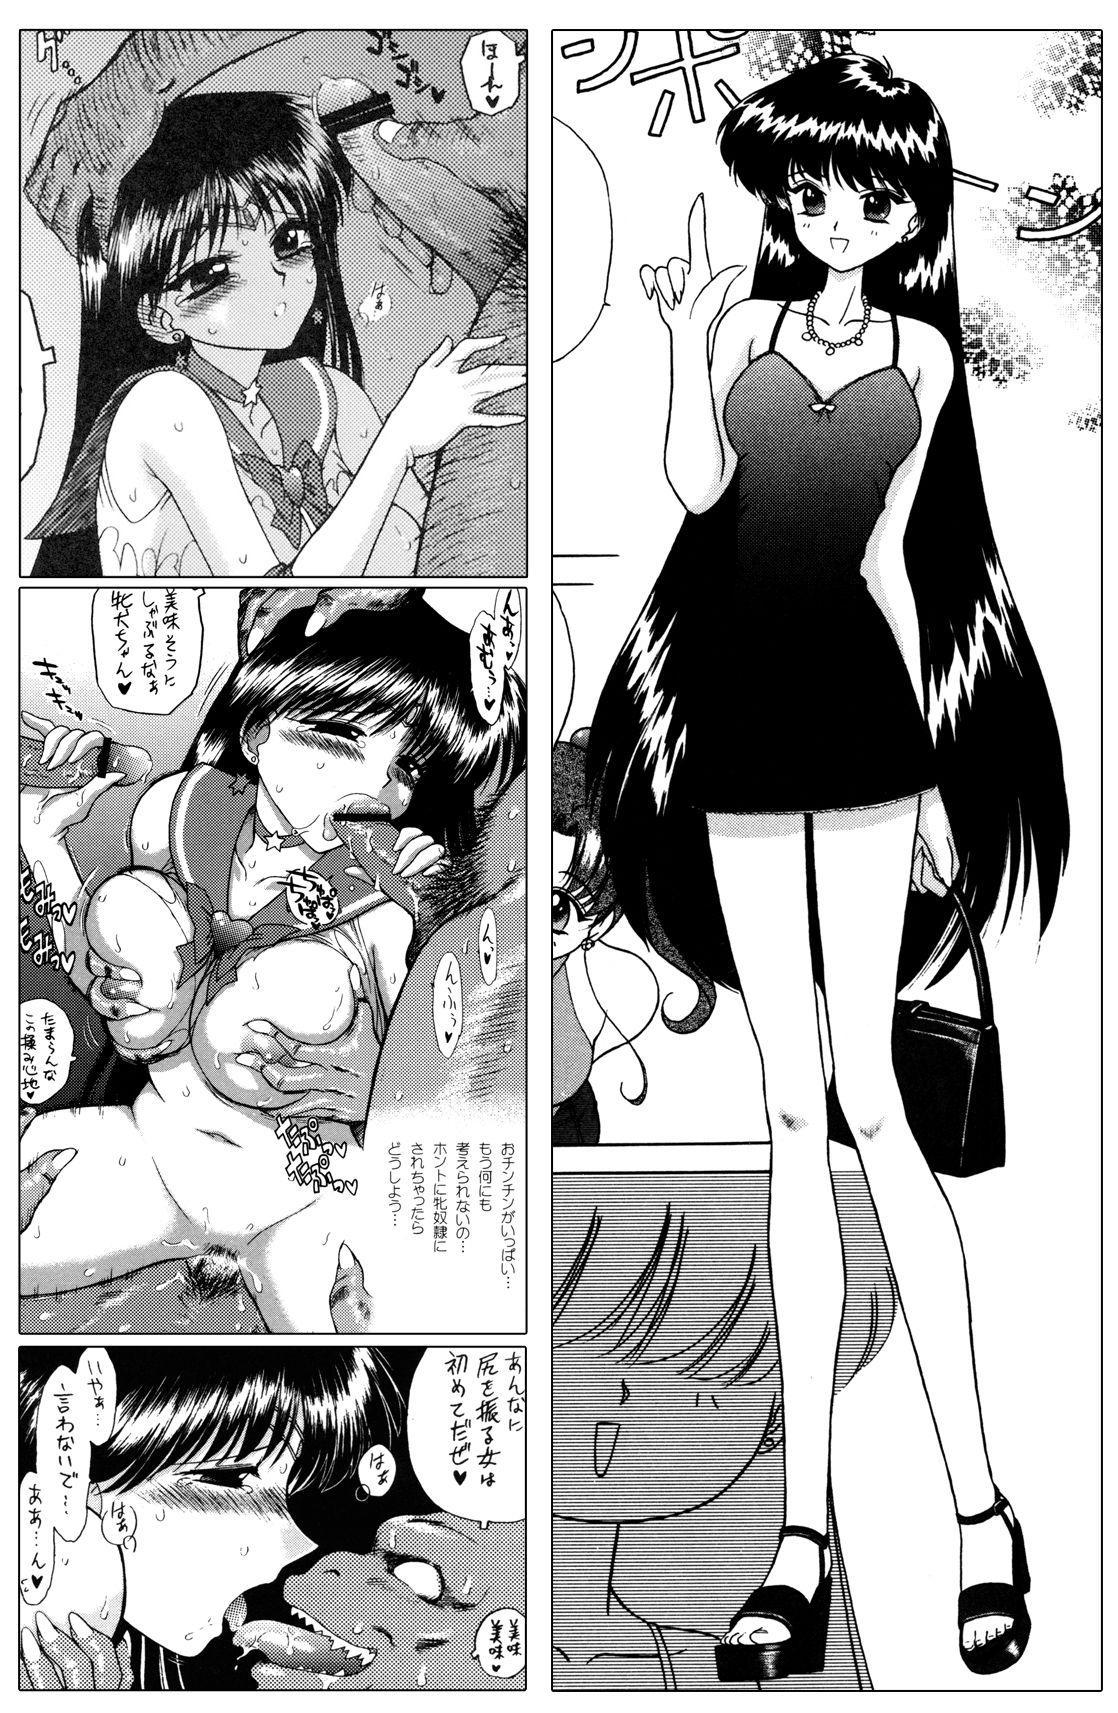 Hard Porn QUEEN OF SPADES - 黑桃皇后 - Sailor moon Female - Page 12